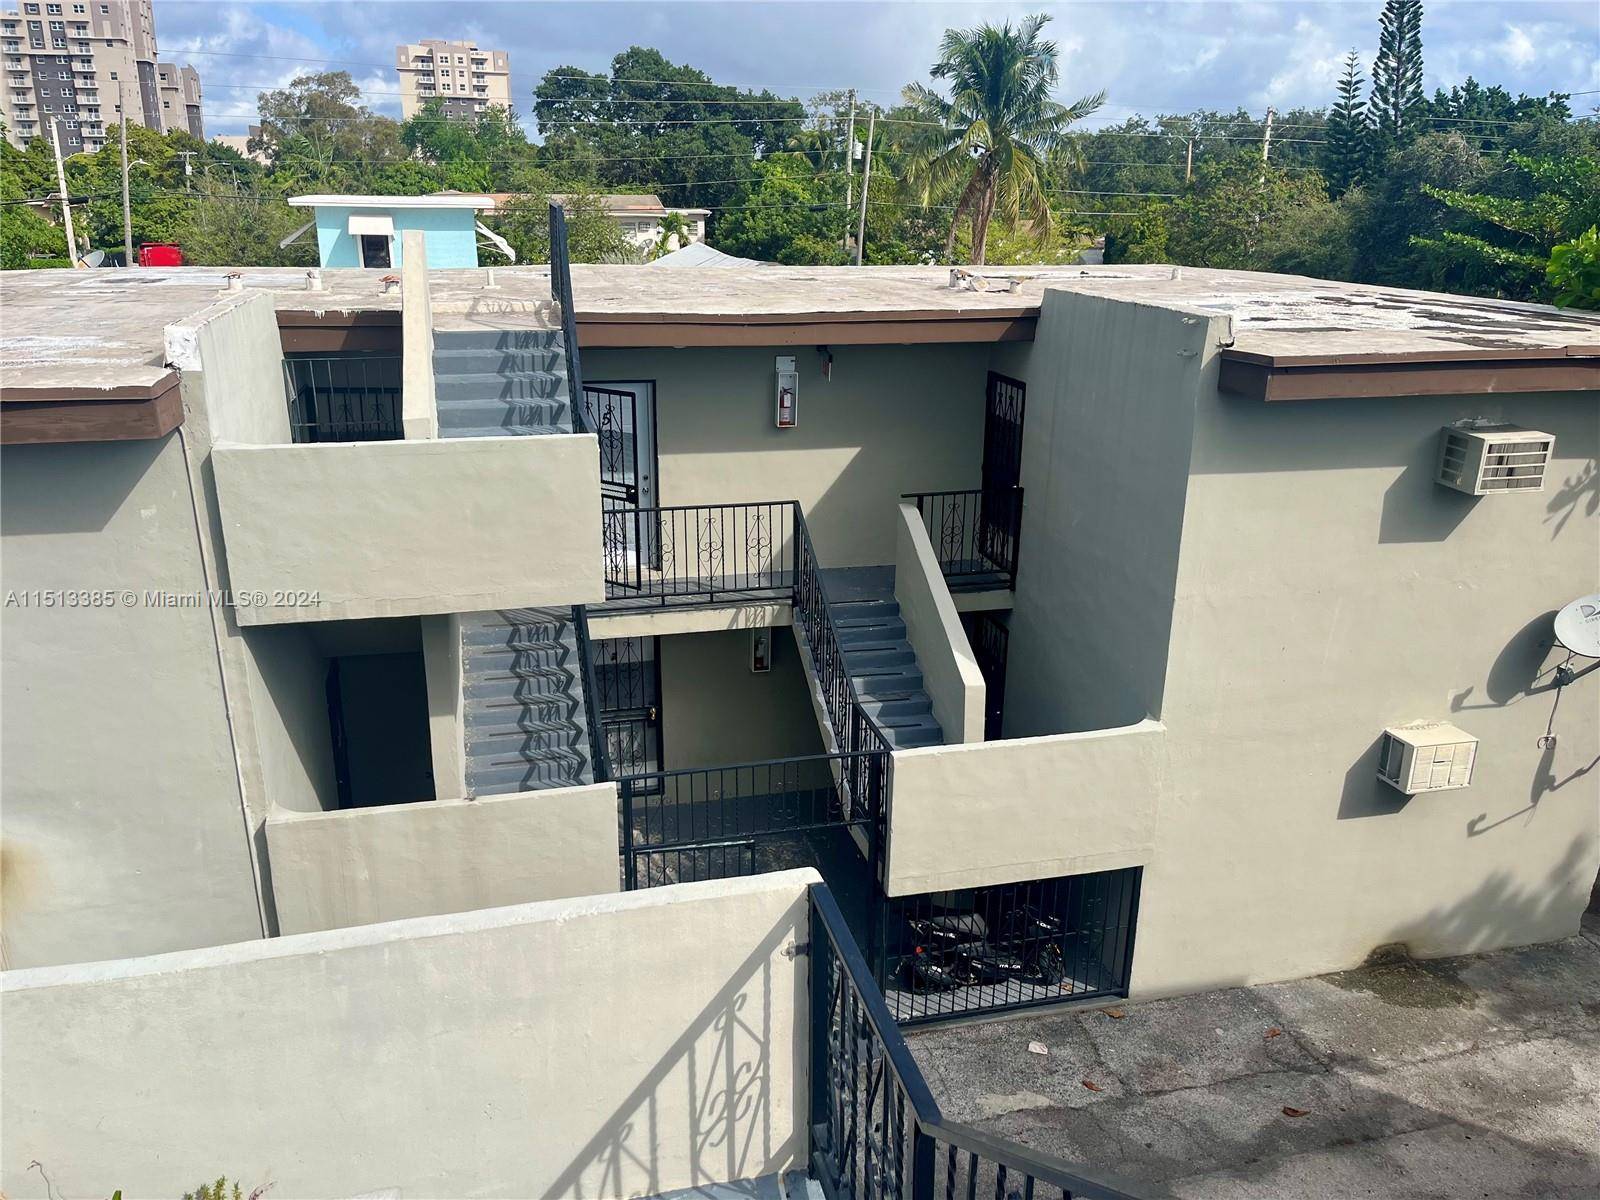 GREAT OPPORTUNITY TO AQUIRE IN AN EXCELLENT AREA 12 UNIT IN 2 BUILDINGS OFF BISCAYNE BLVD 75TH AVE.